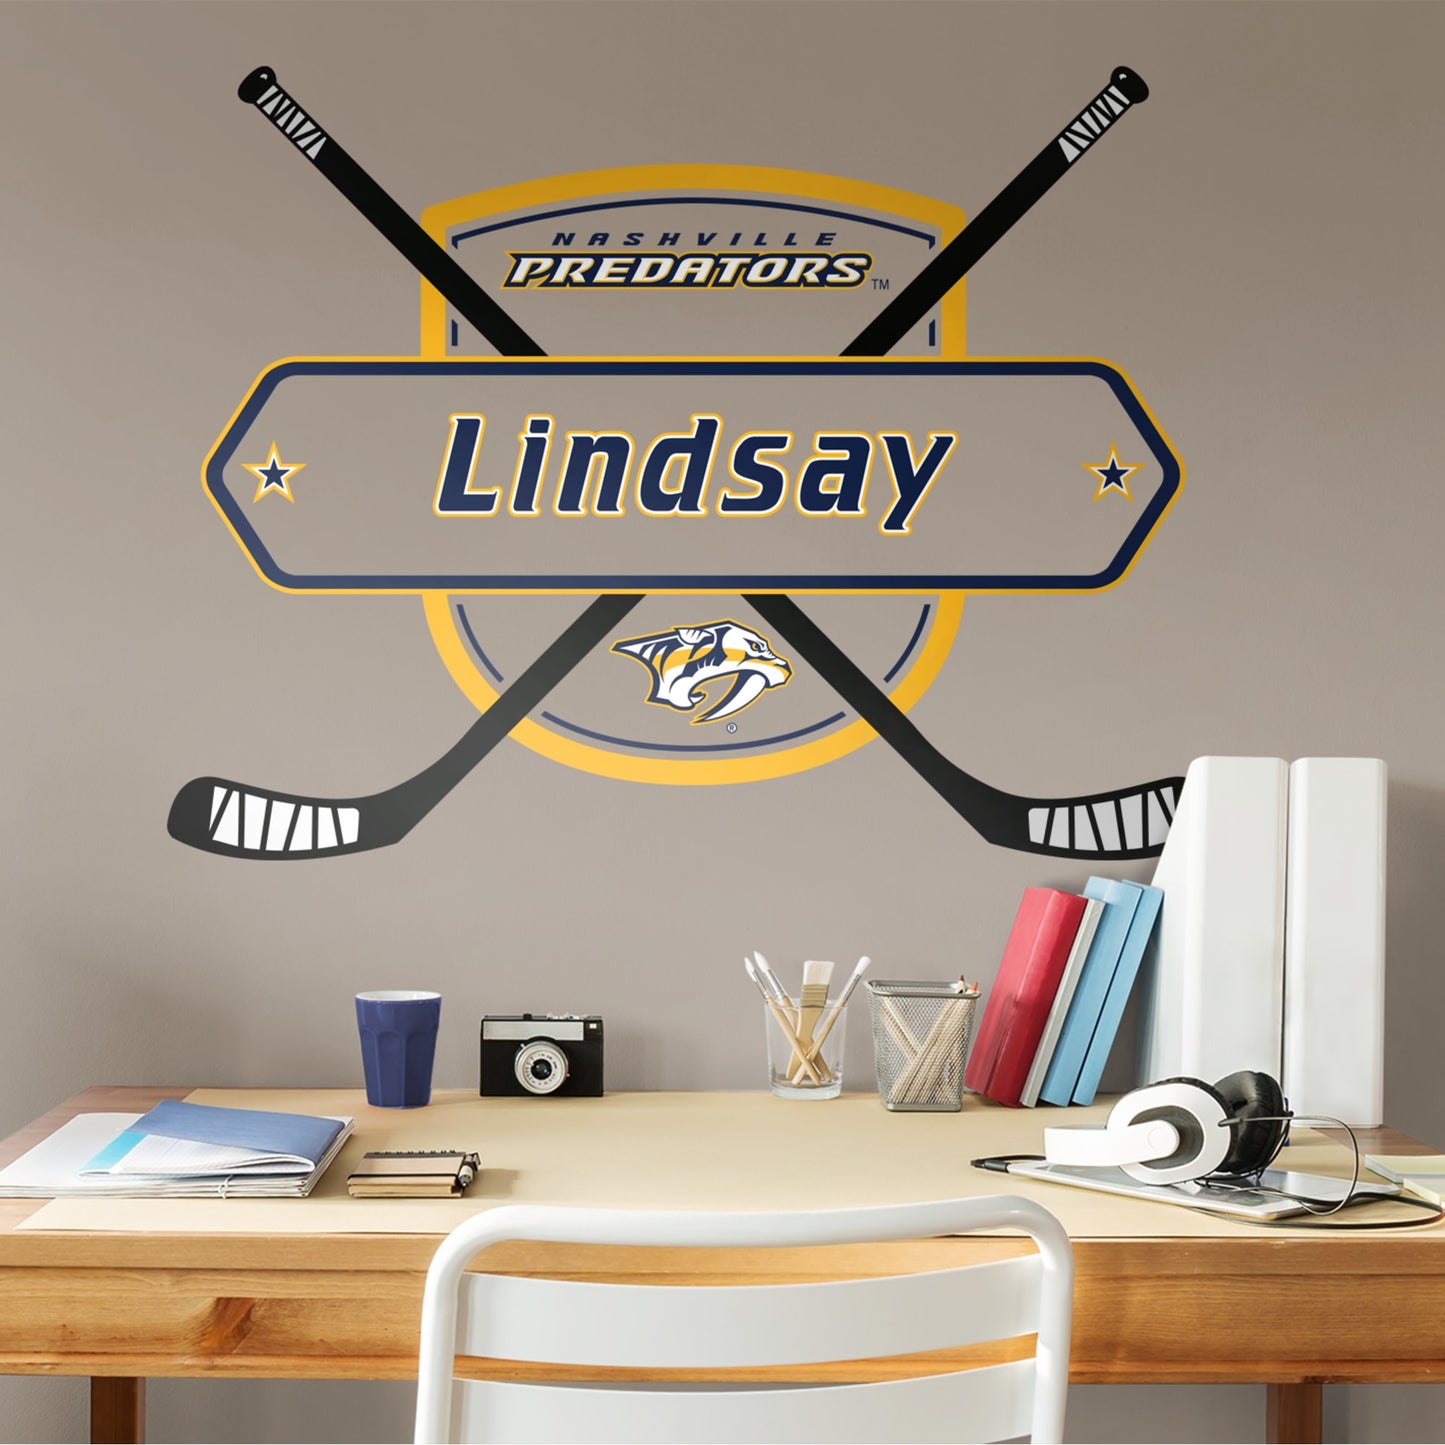 Nashville Predators: Personalized Name - Officially Licensed NHL Transfer Decal